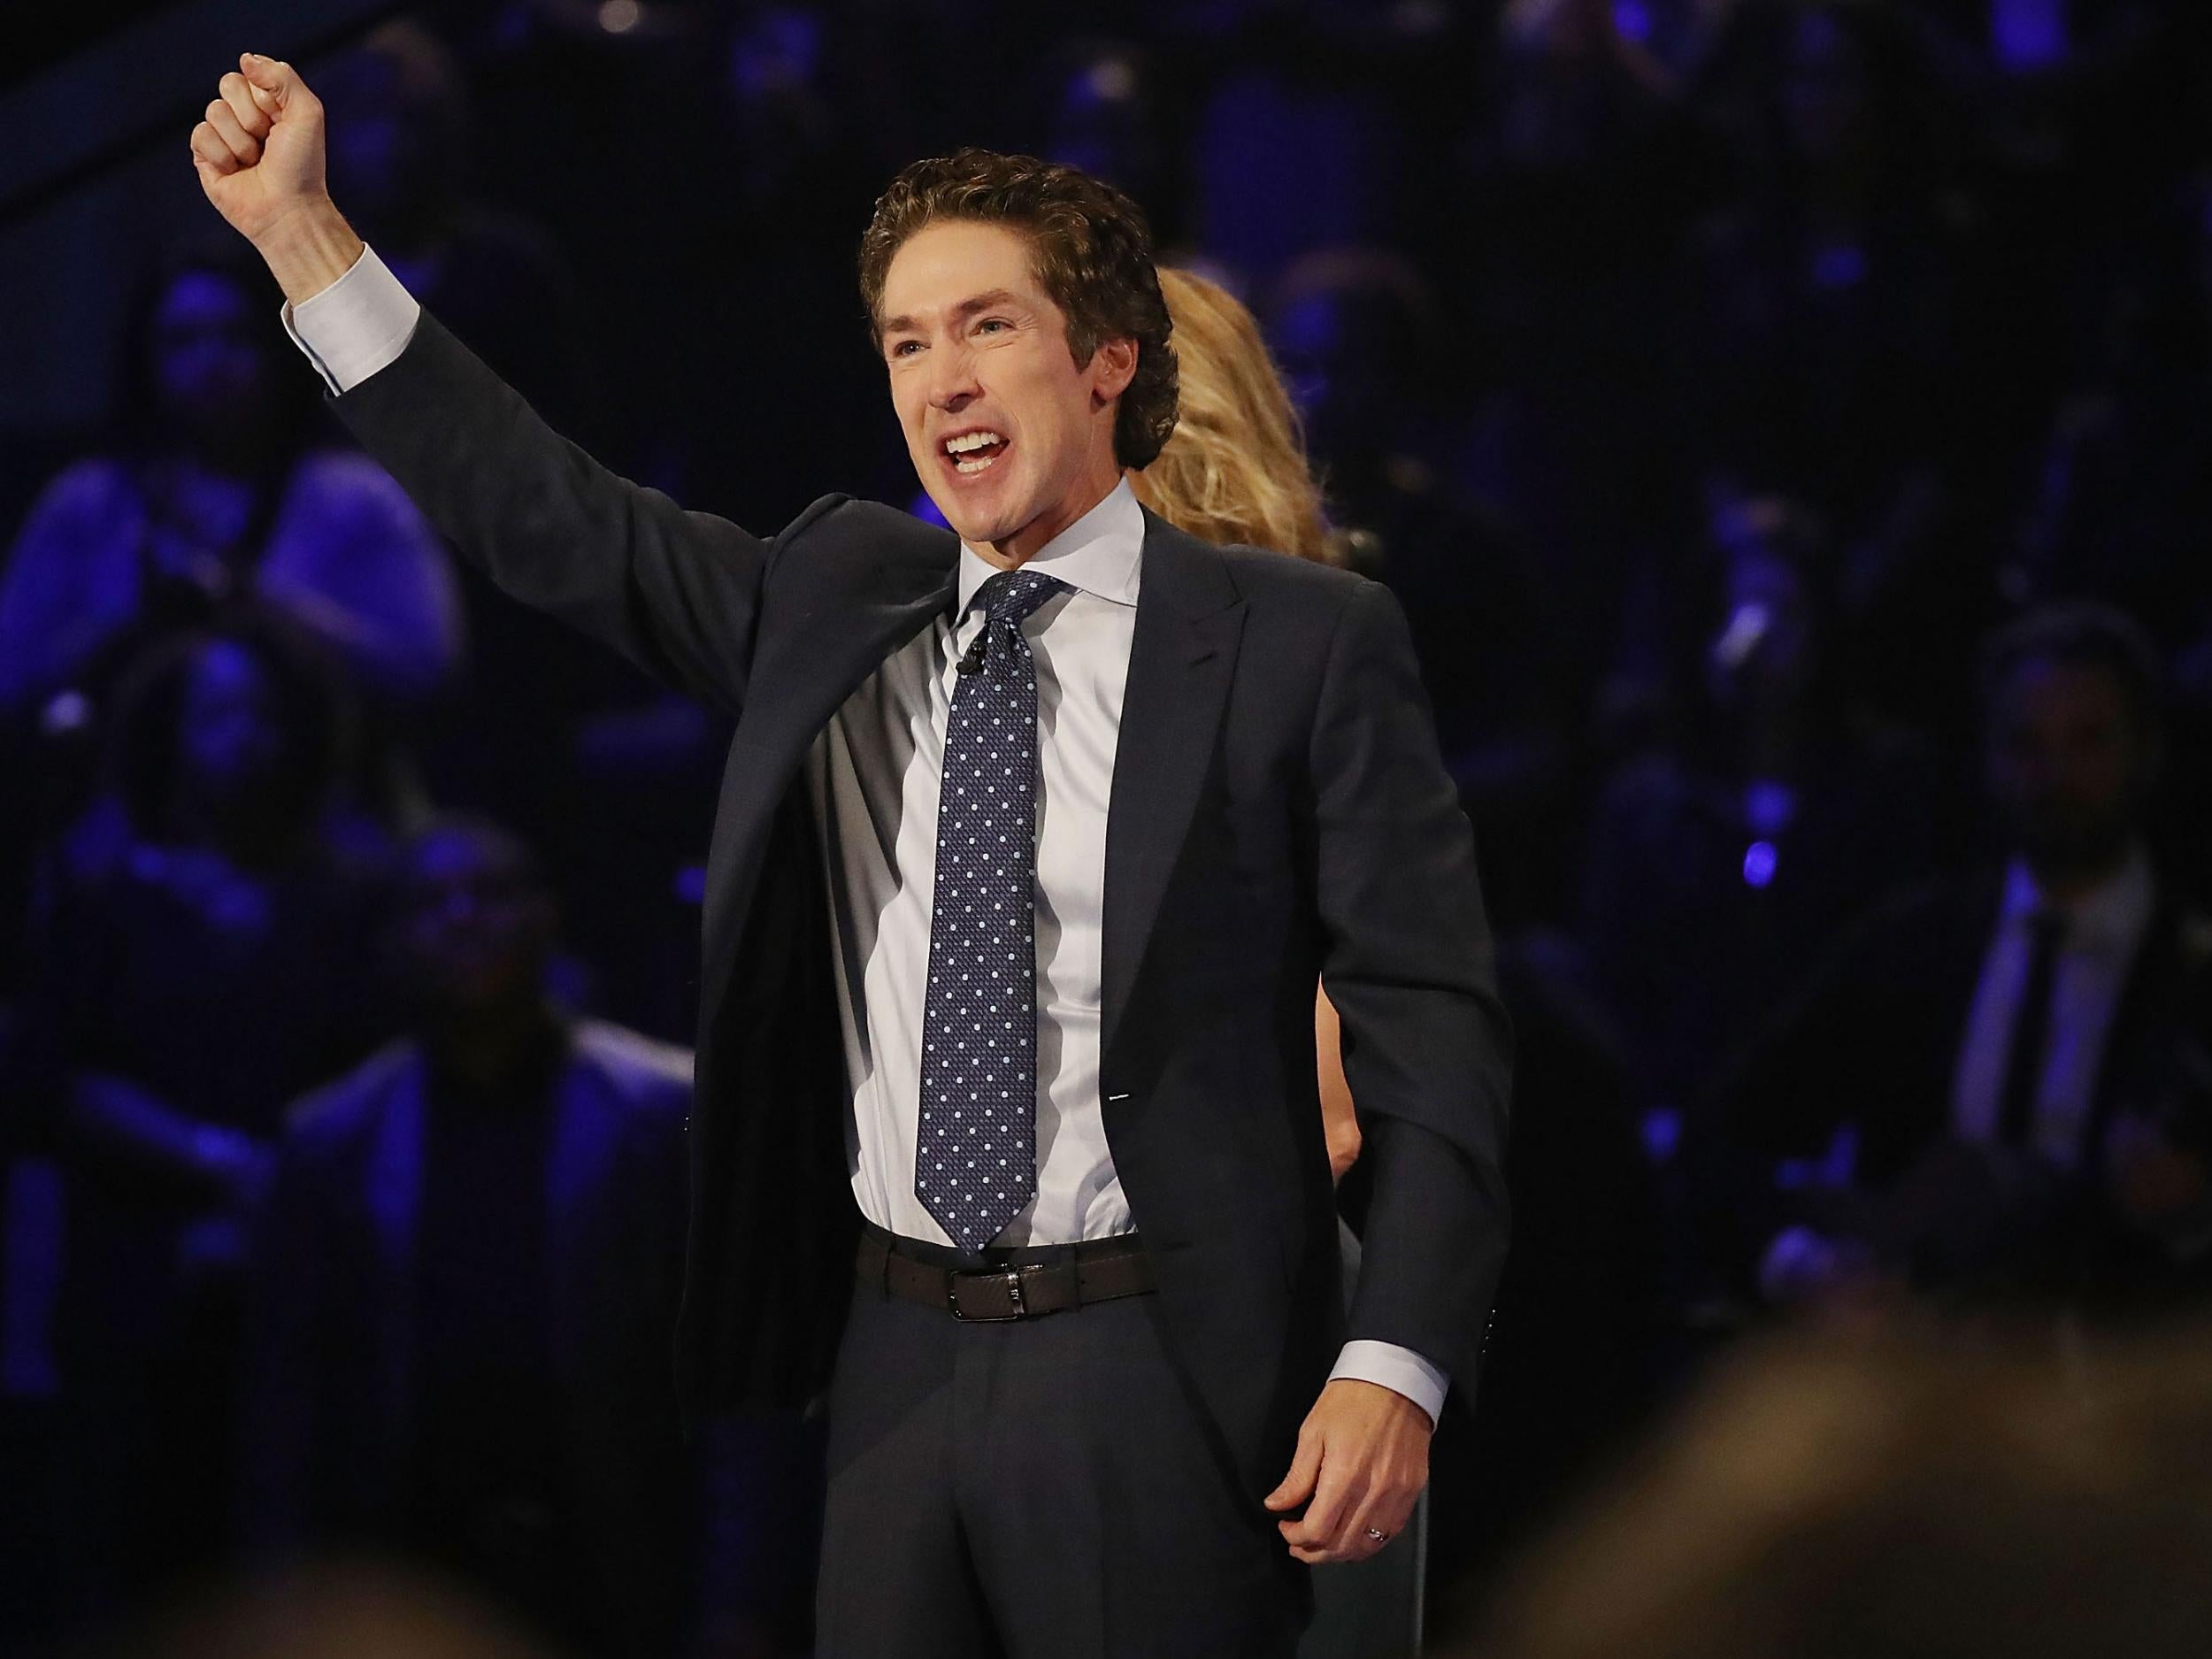 Joel Osteen, the pastor of Lakewood Church, conducts a service at his church as Houston starts the process of rebuilding